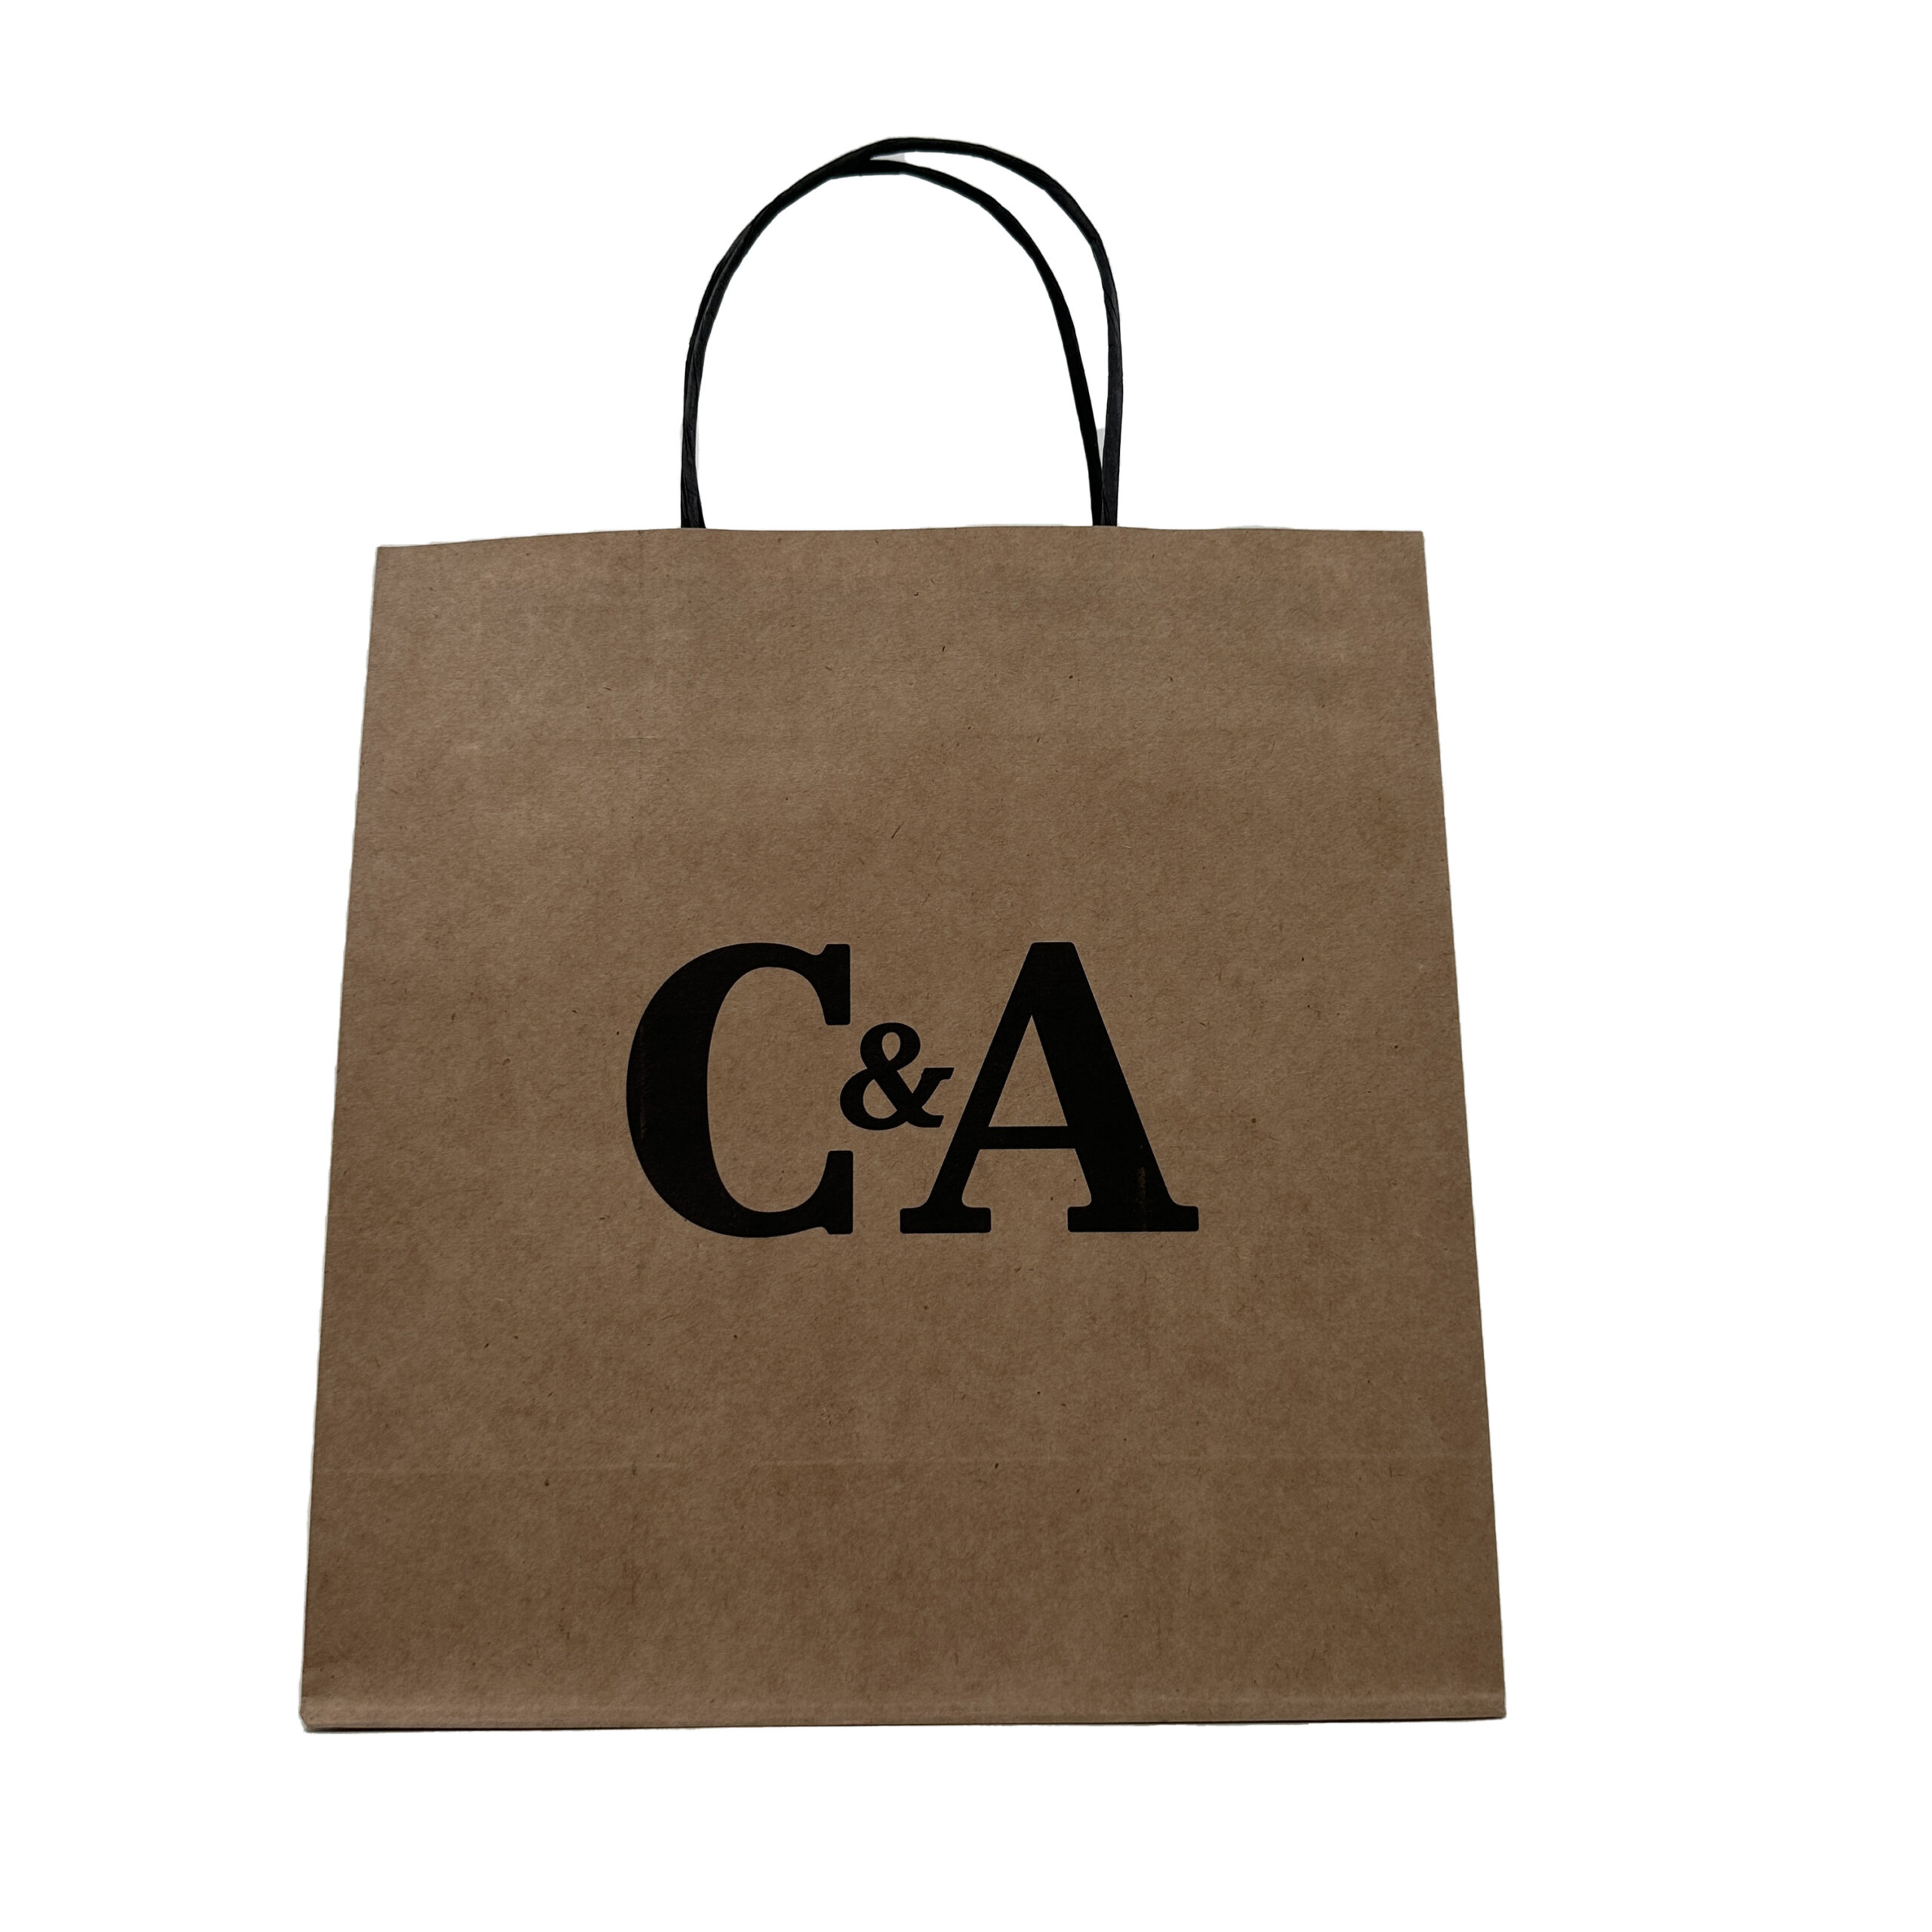 CA Twisted Handle Paper Bag